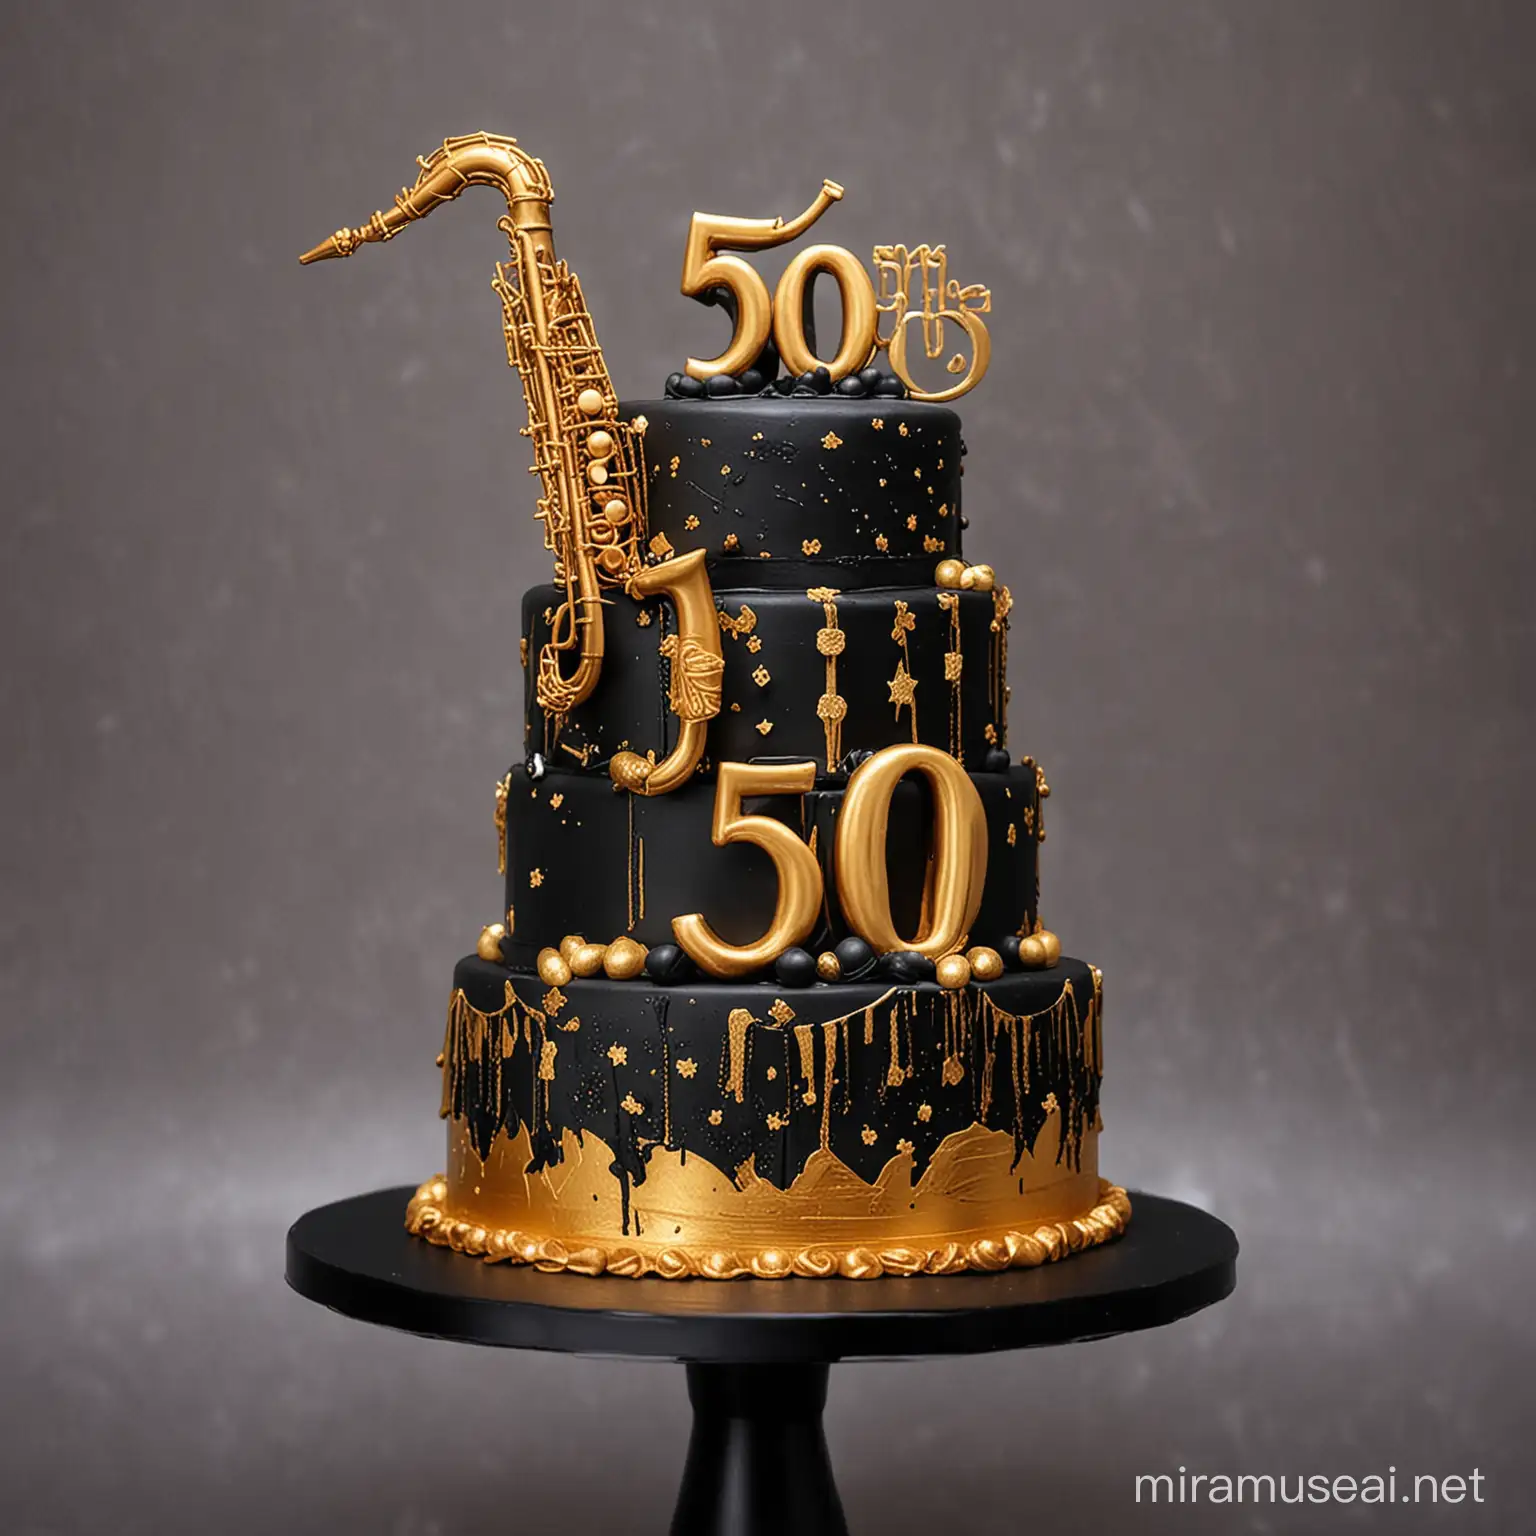 3 tiers black and gold 50th birthday cake with golden saxophone on topper